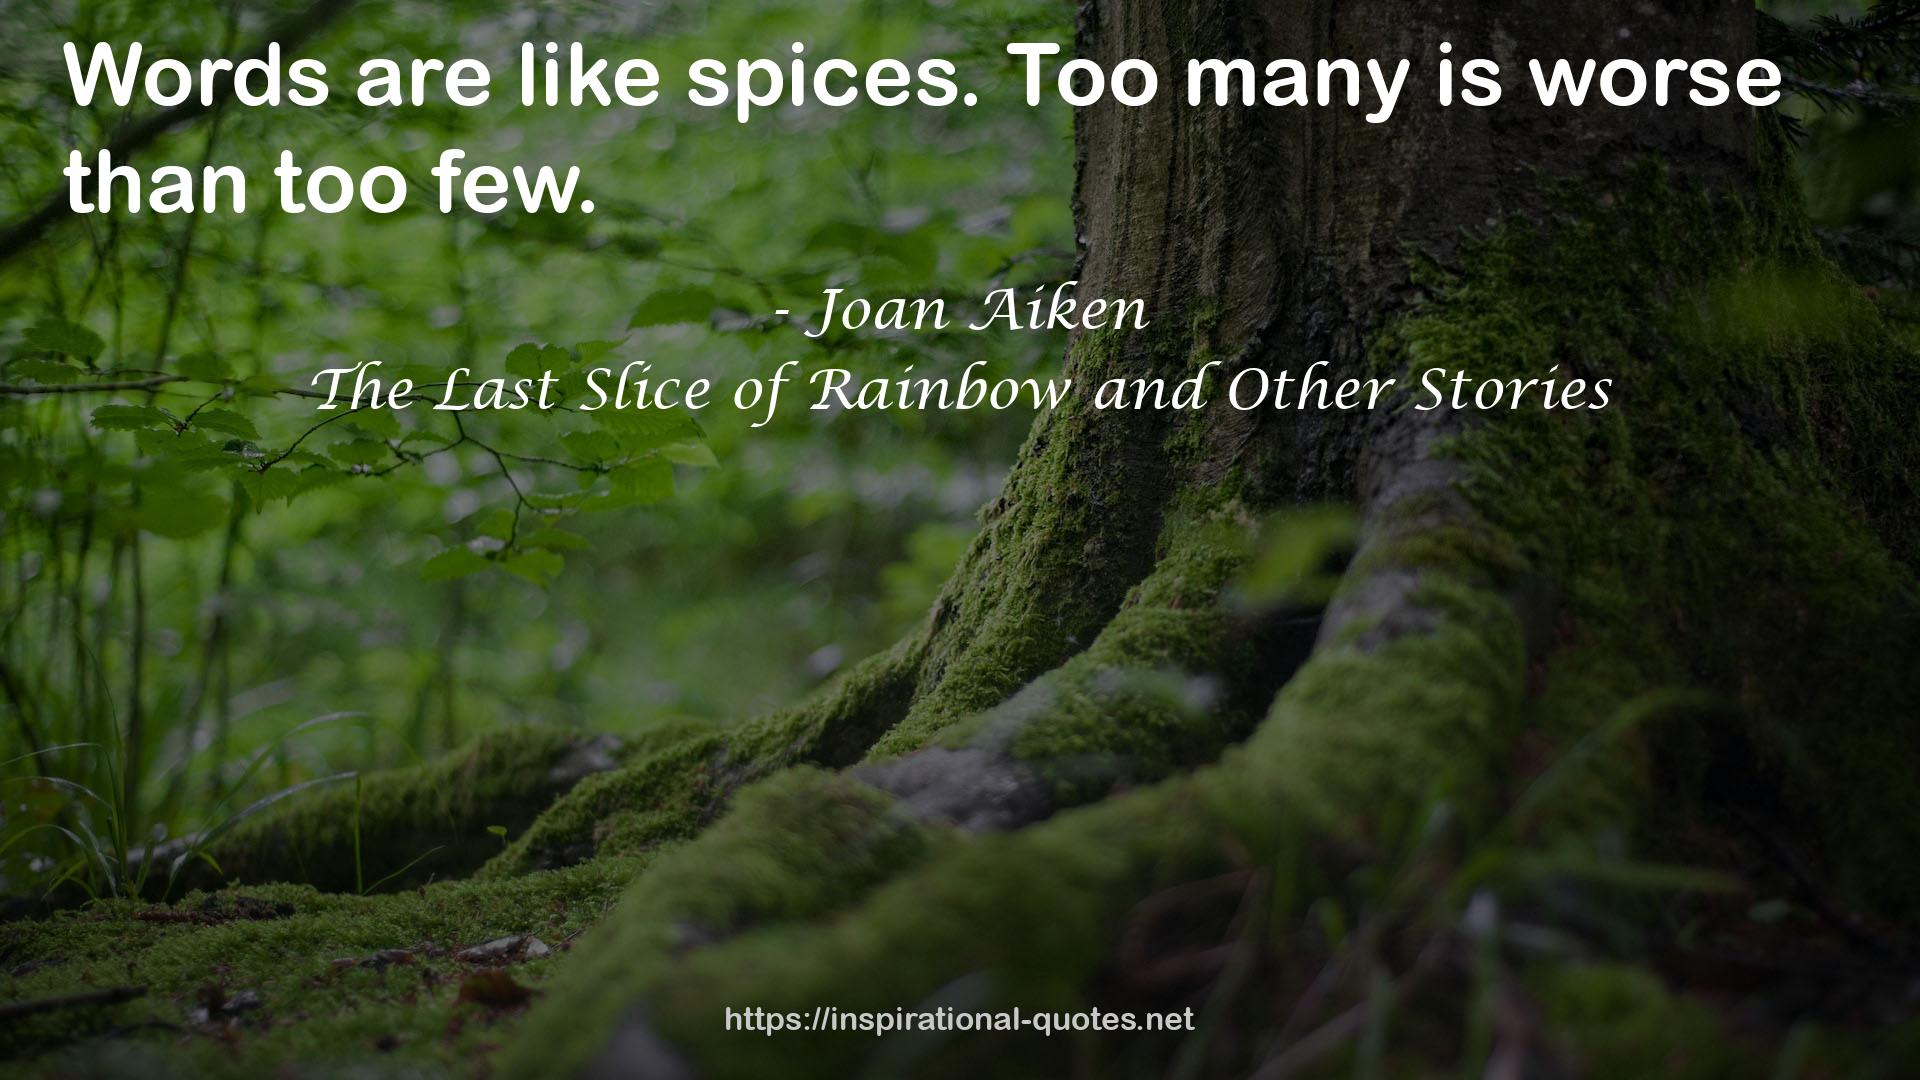 The Last Slice of Rainbow and Other Stories QUOTES